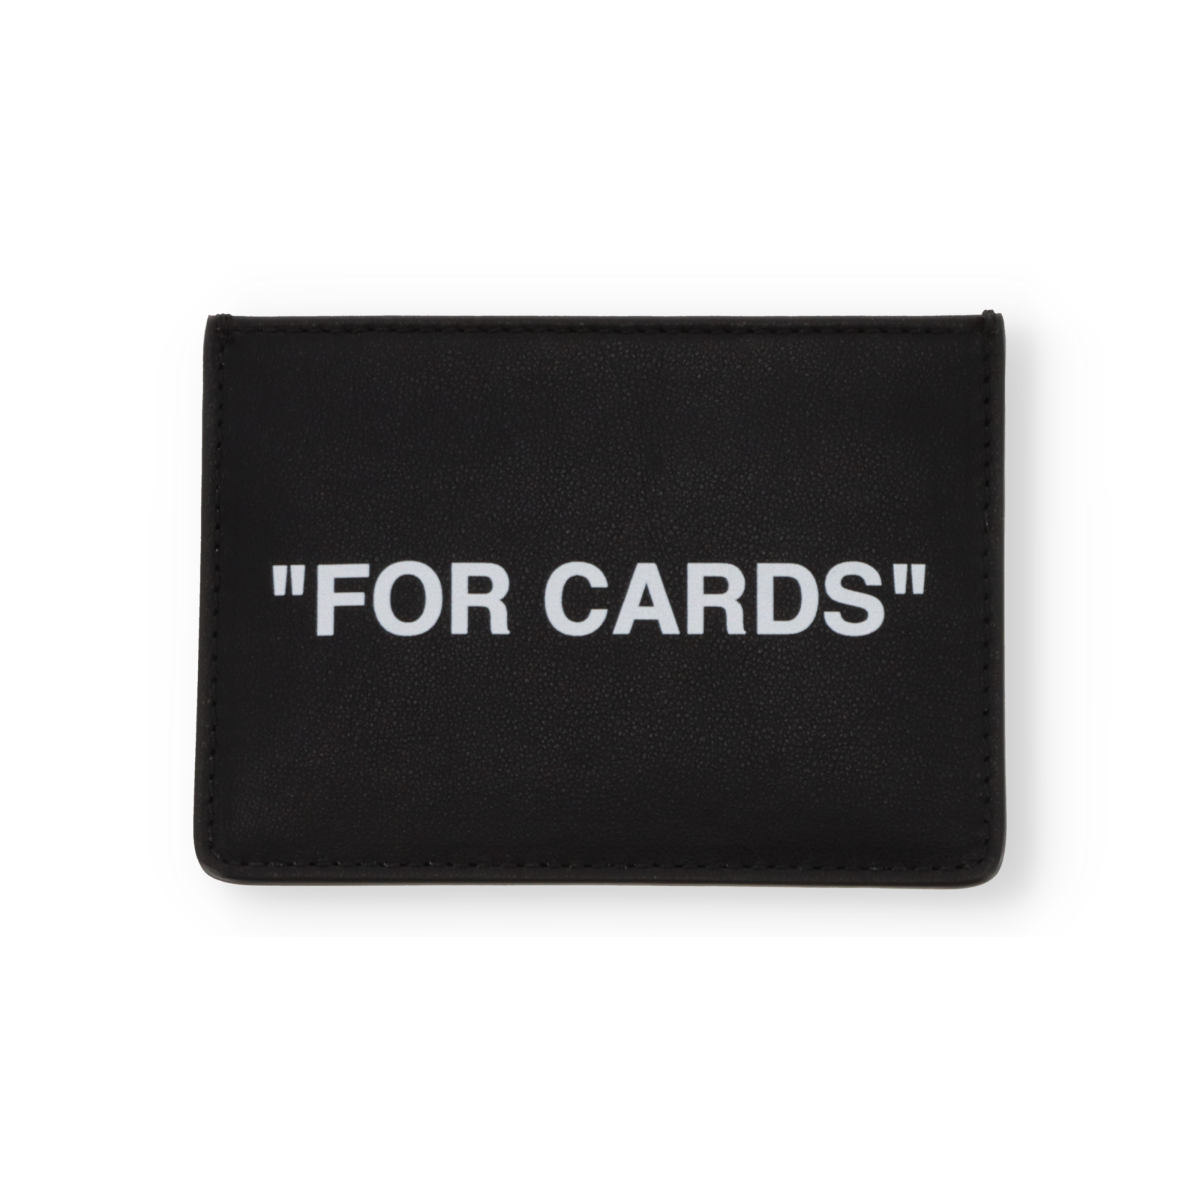 Off-White "For Cards" Card Holder